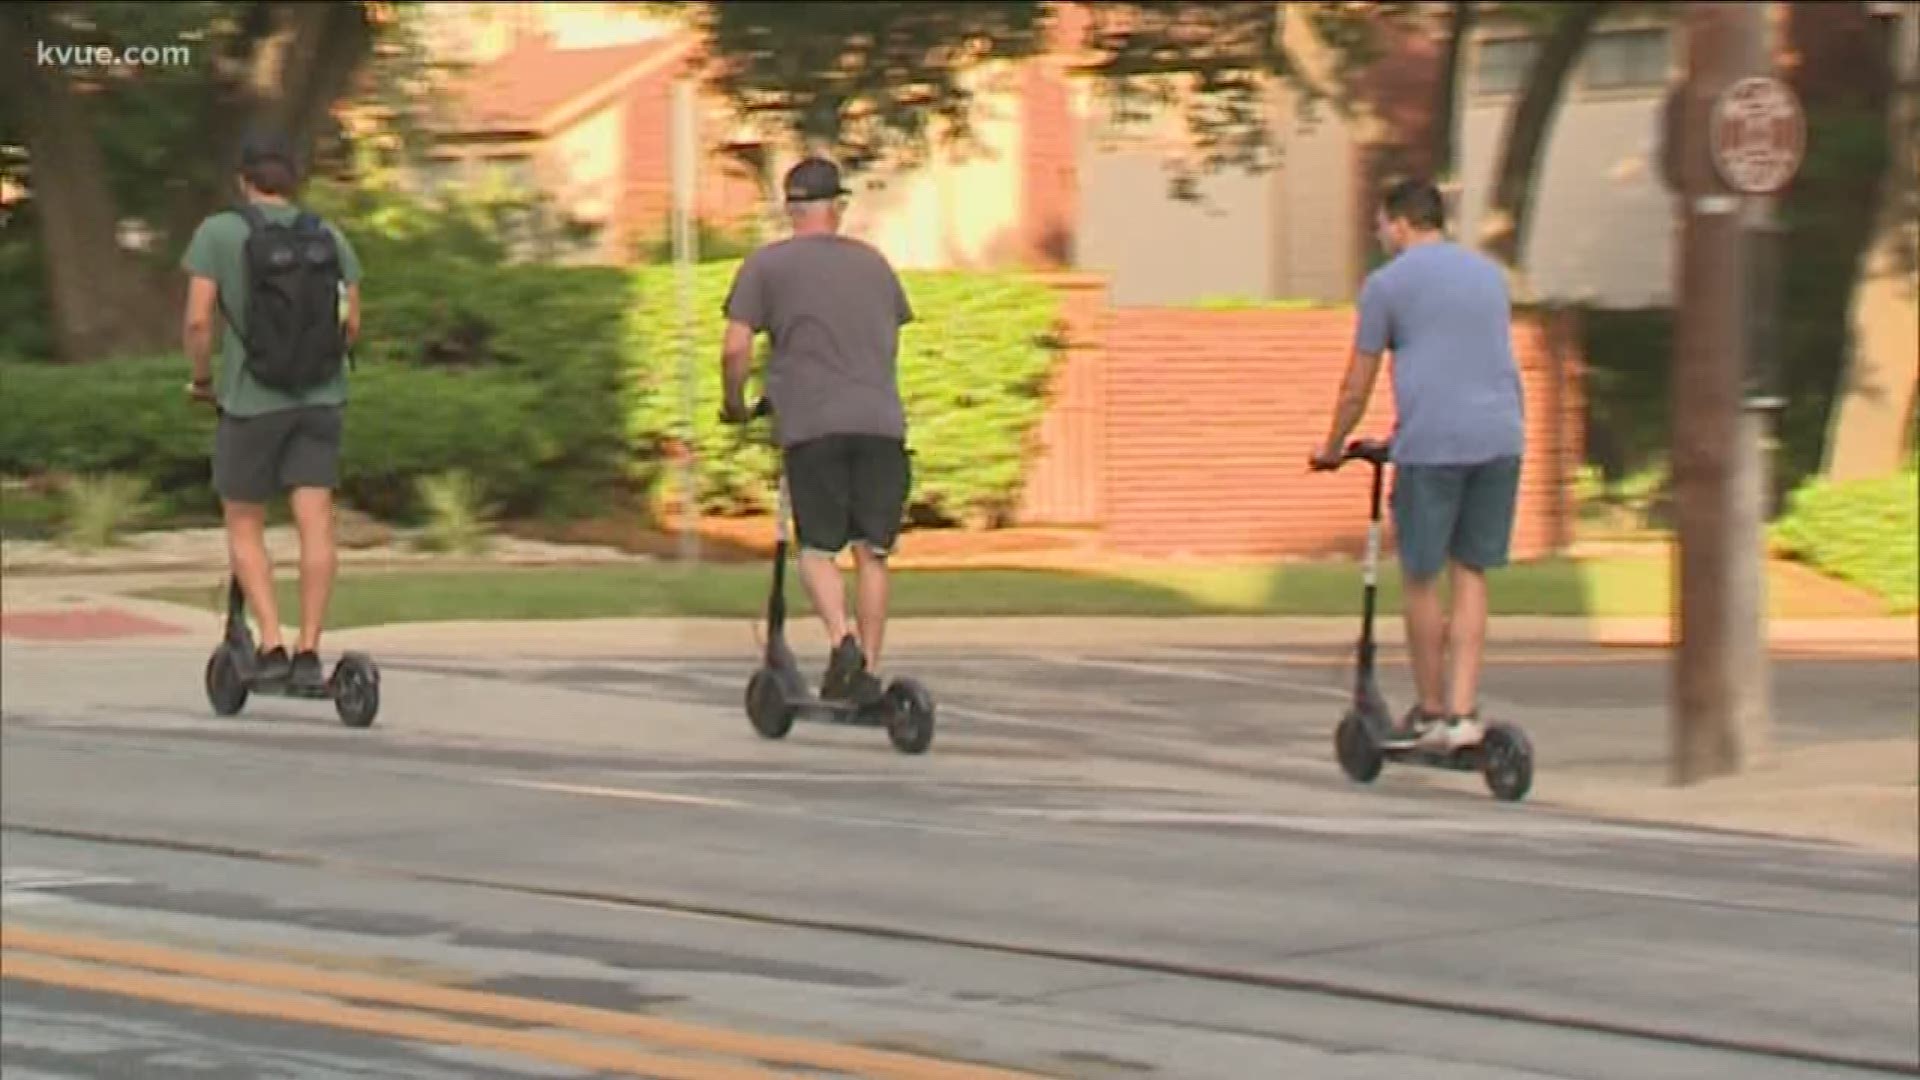 There are at least eight new lawsuits against scooter companies in Austin, all filed within the last few days.